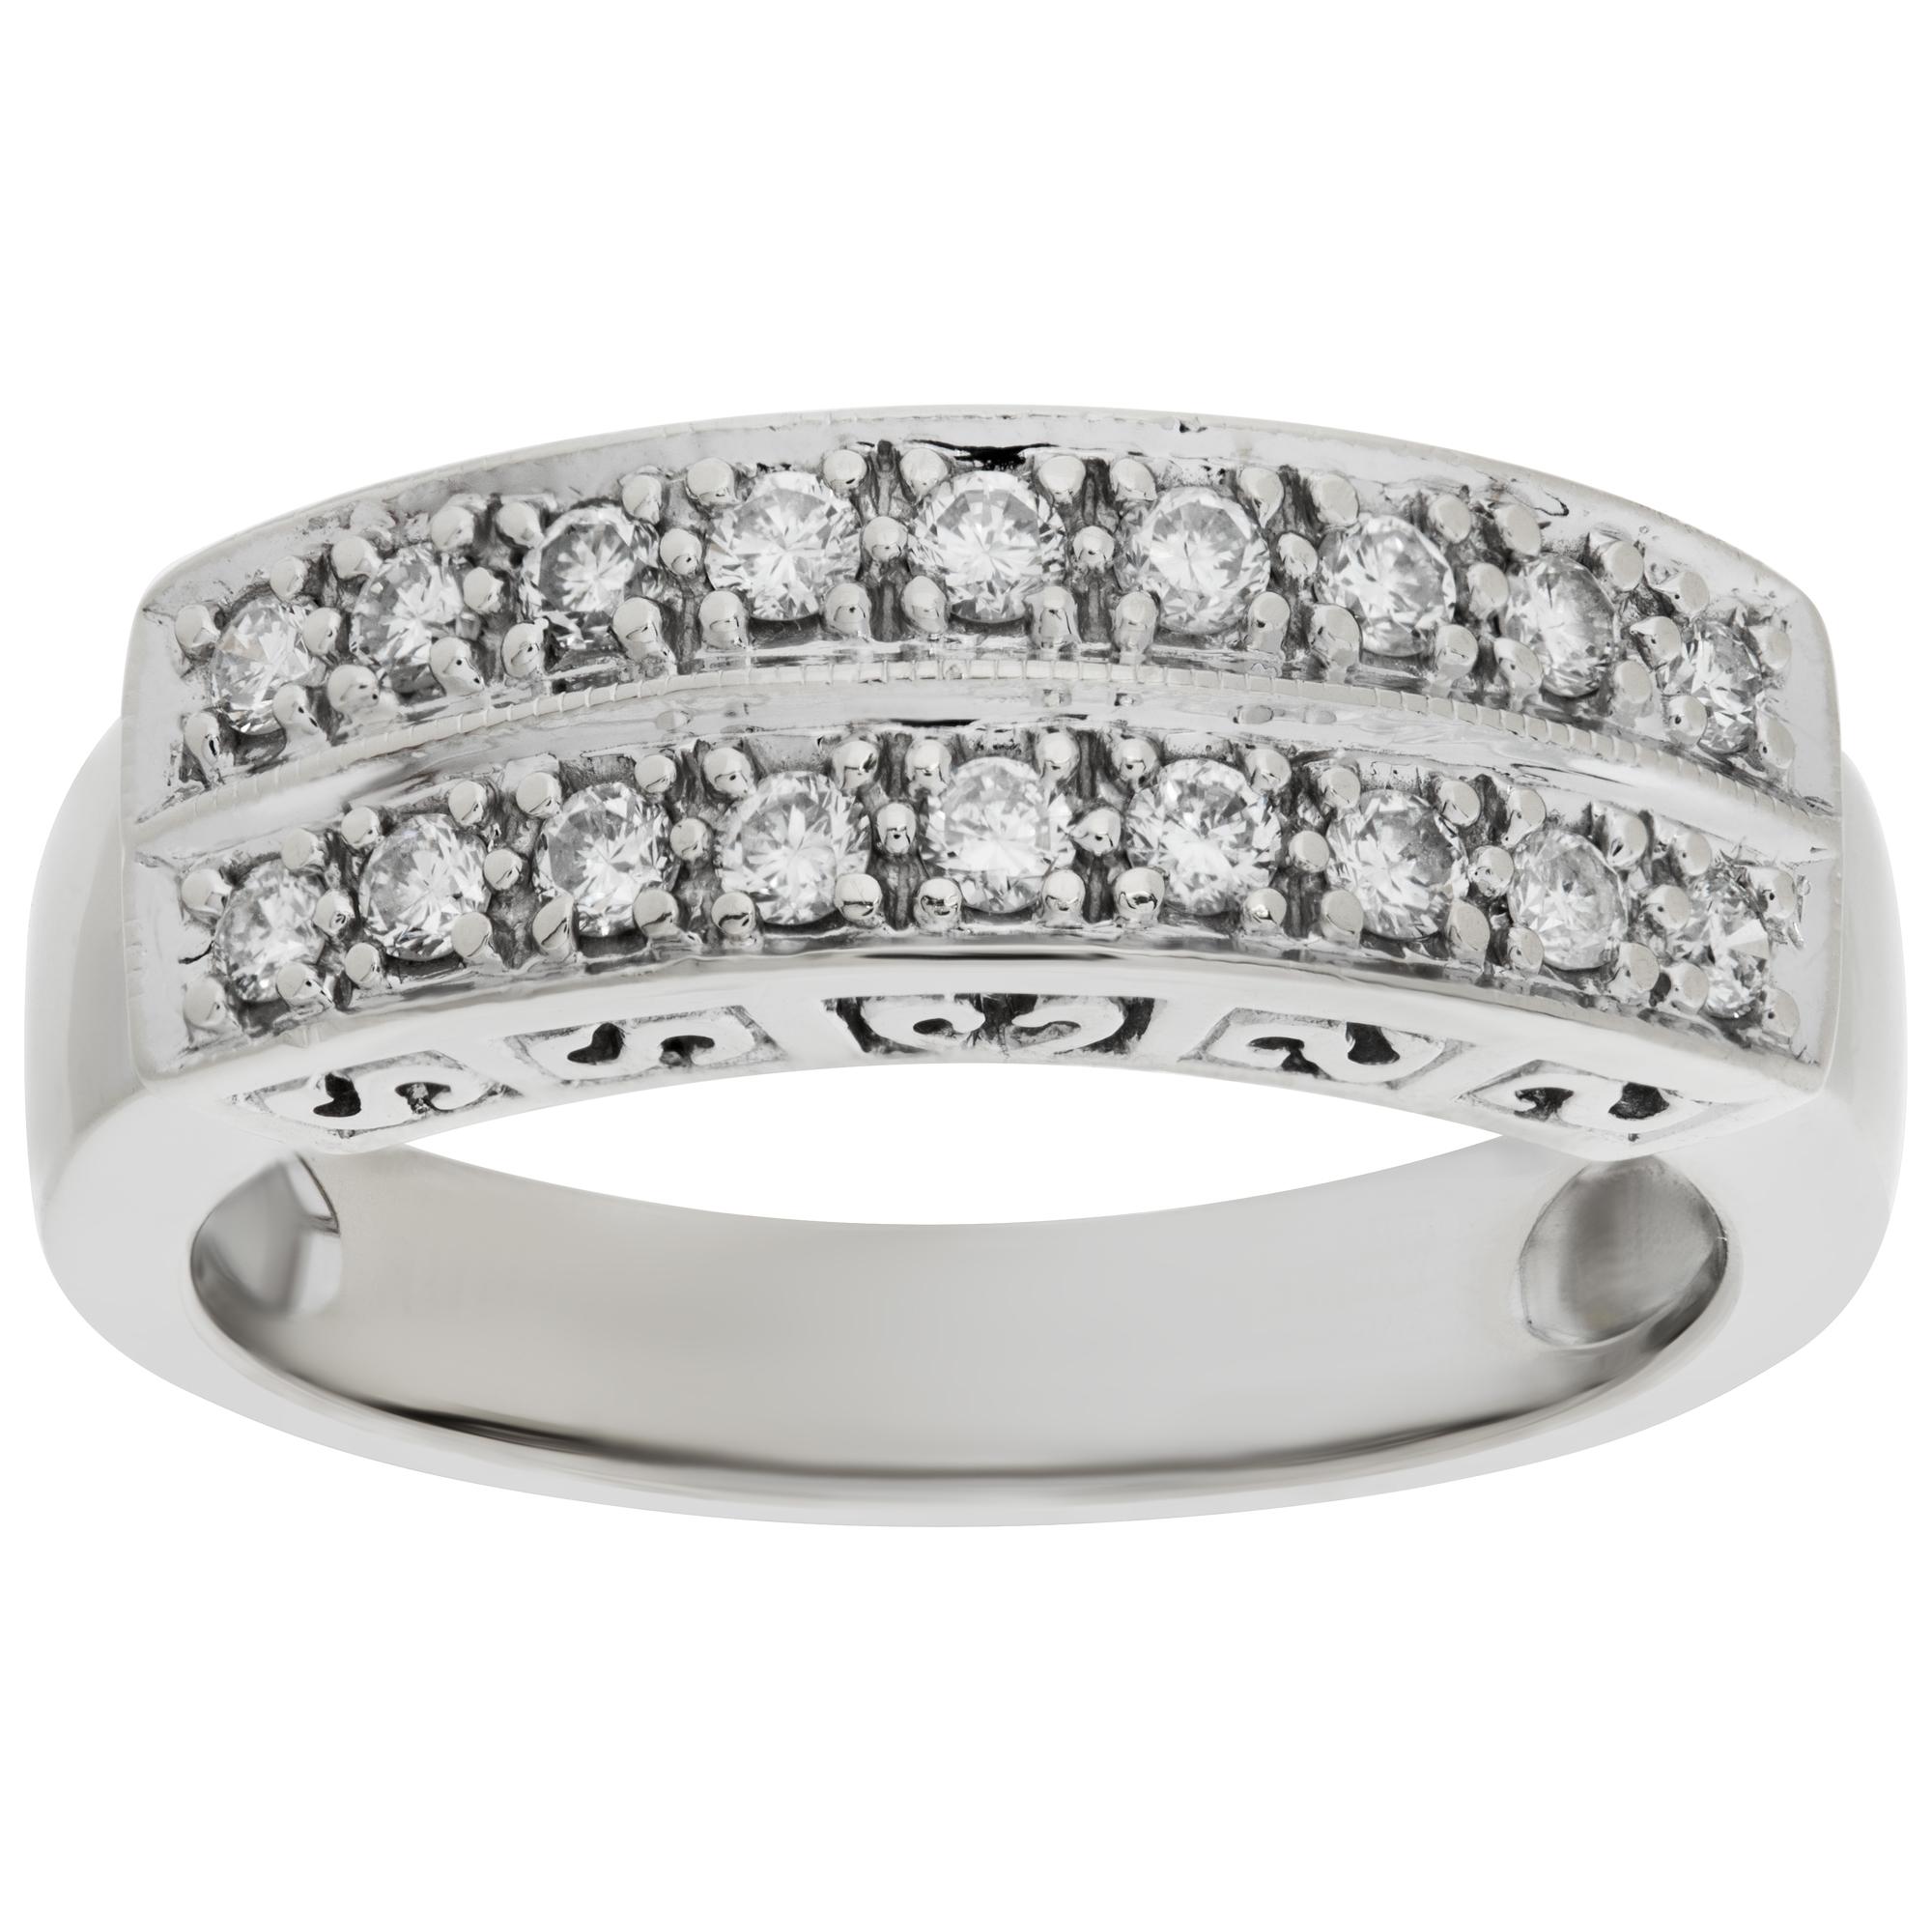 Double row diamond band in 14k white gold with approximately 0.35 carat in round diamonds; size 7.This Diamond ring is currently size 7 and some items can be sized up or down, please ask! It weighs 3.5 pennyweights and is 14k White Gold.
